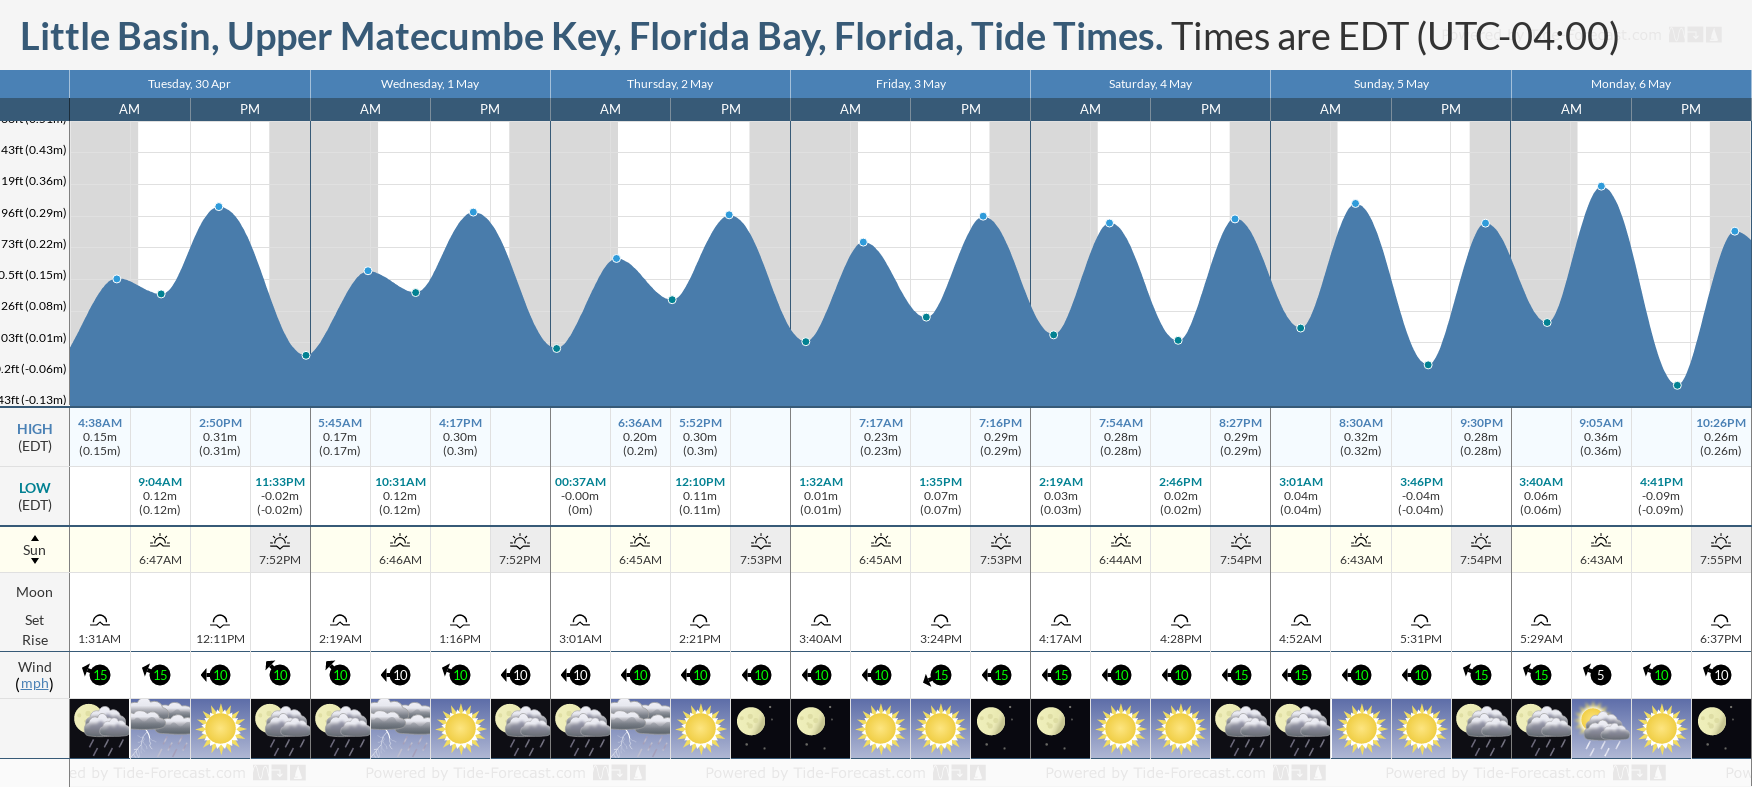 Little Basin, Upper Matecumbe Key, Florida Bay, Florida Tide Chart including high and low tide tide times for the next 7 days